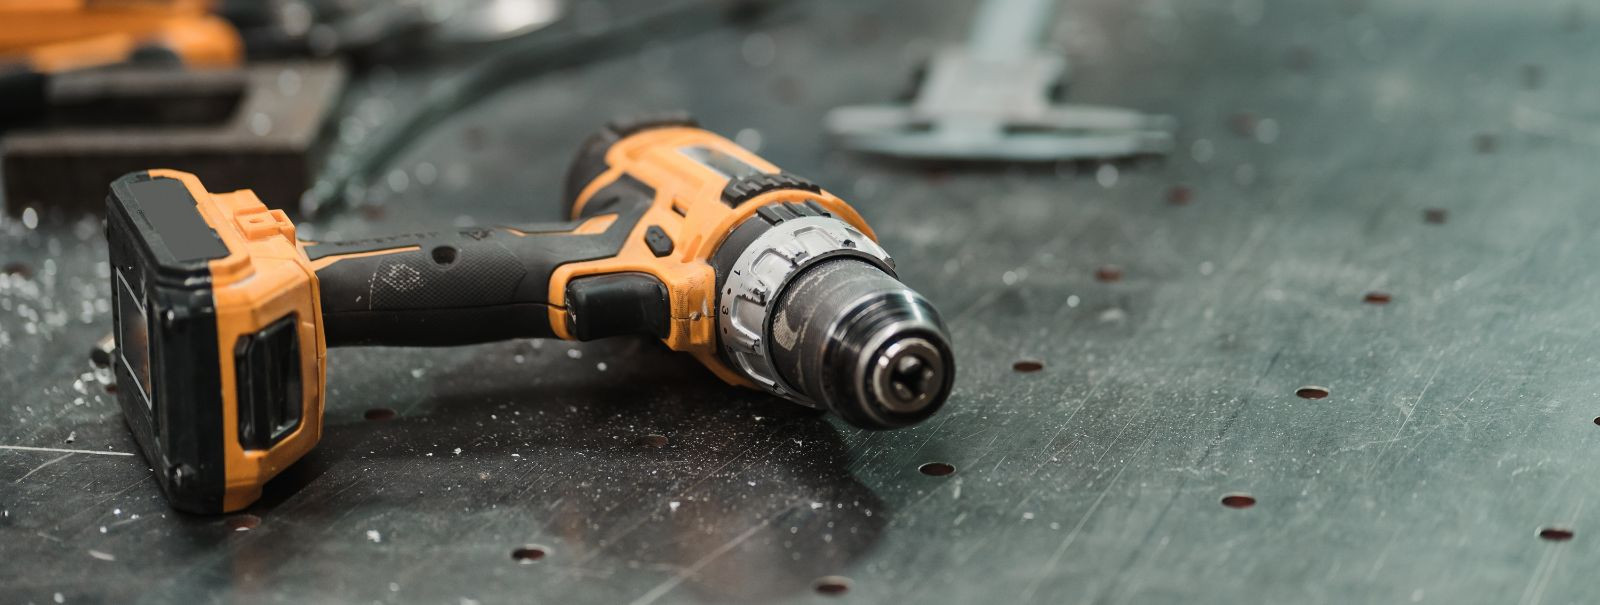 Advanced drill motors are the heart of modern drilling equipment, designed to deliver superior performance in the most demanding construction environments. Thes